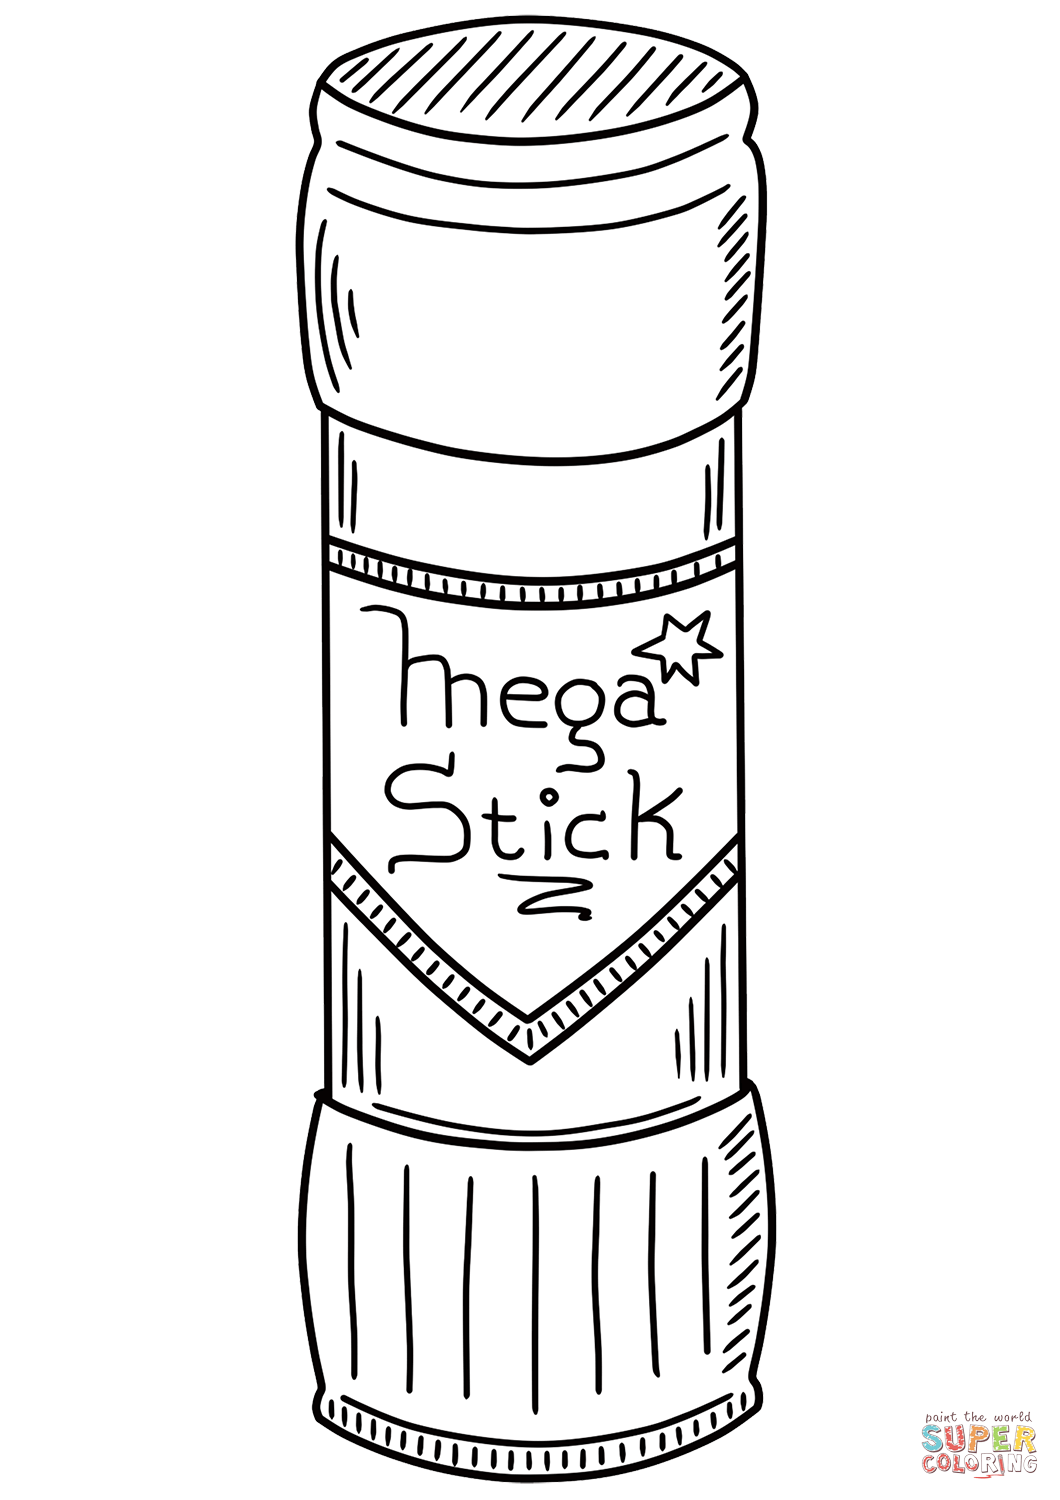 Glue stick coloring page free printable coloring pages